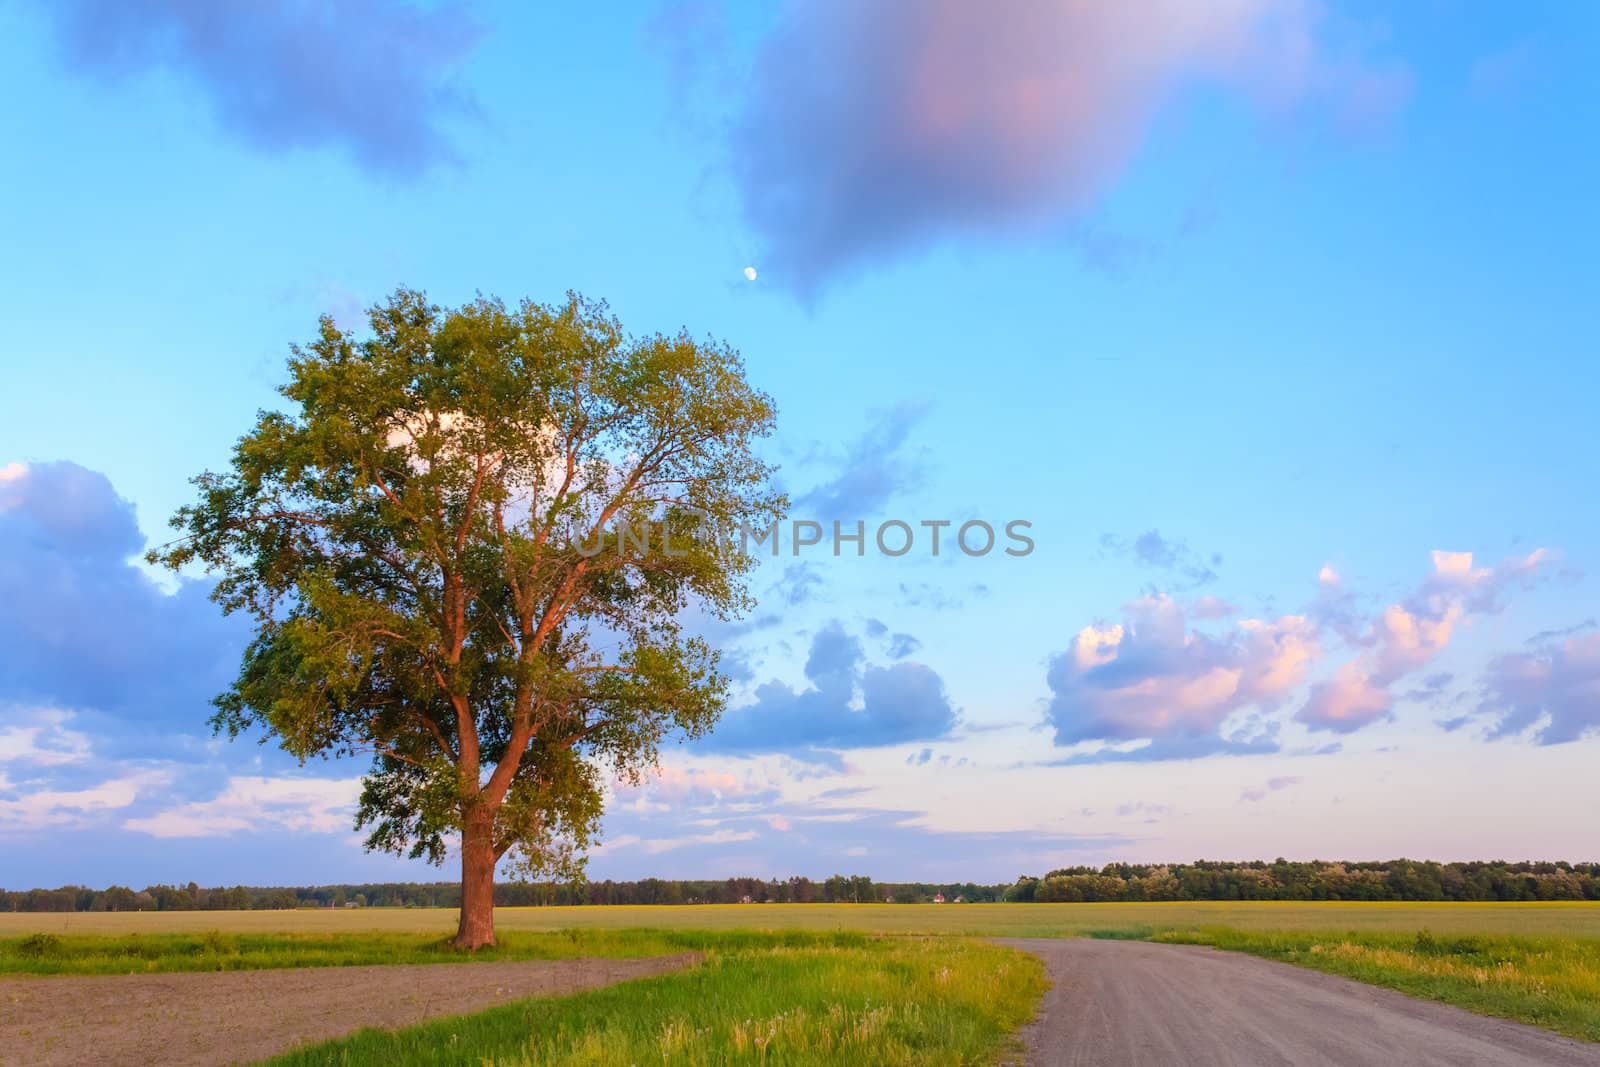 Lonely Tree In Sunset. Dirty Rural Road In Countryside